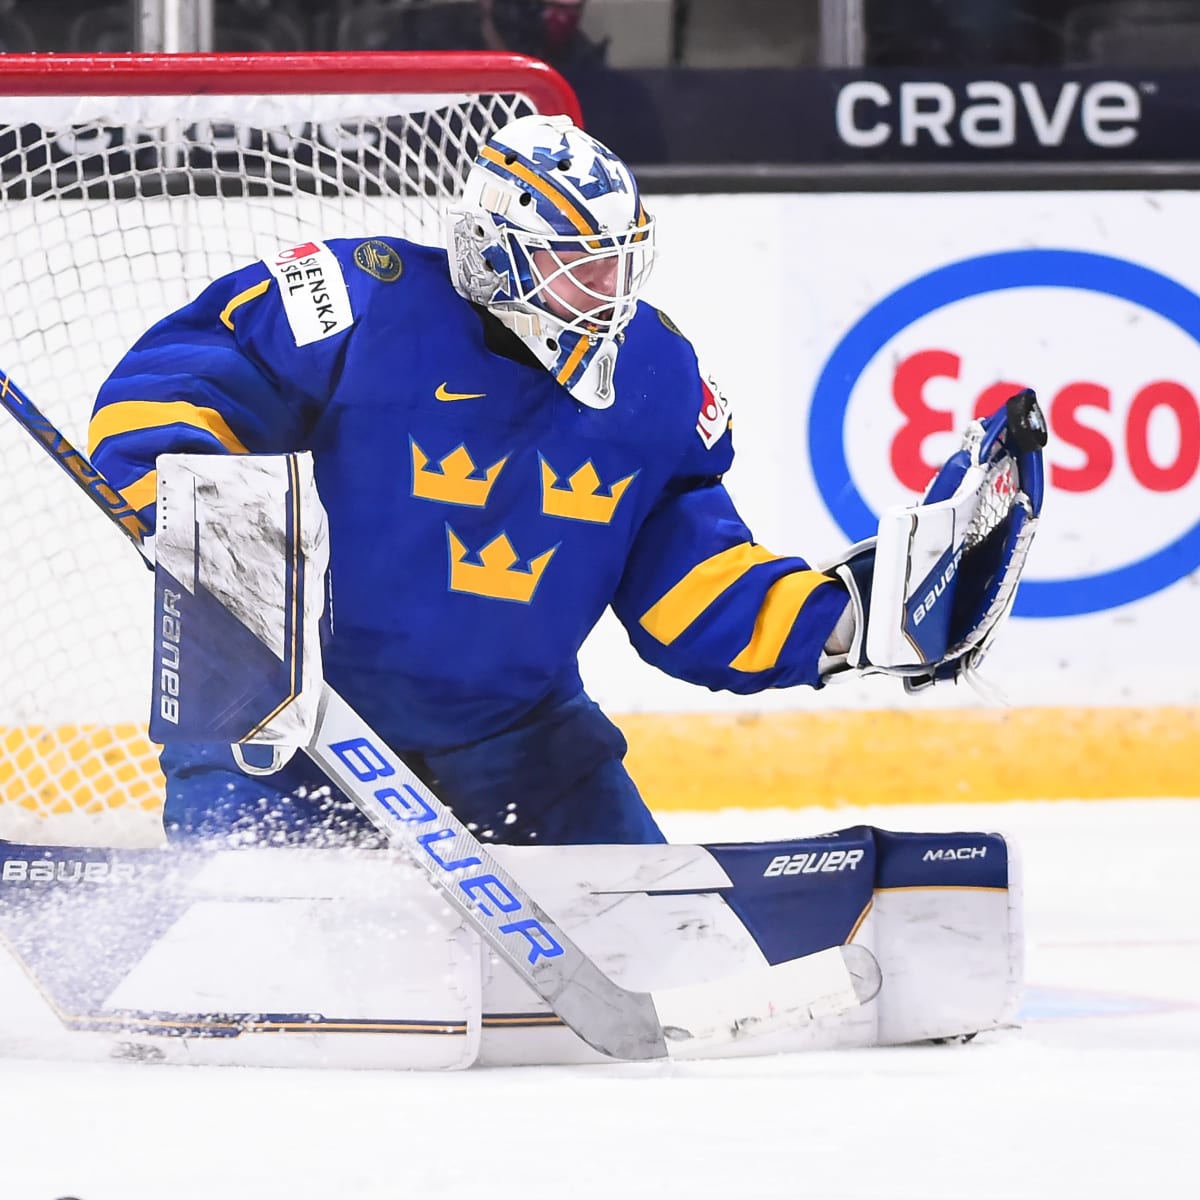 🧱 Jesper Wallstedt secured Sweden's 2-1 victory over Switzerland. He saved 29 out of 30 shots. By the way, Brodin scored the game-winning goal.

#mnwild